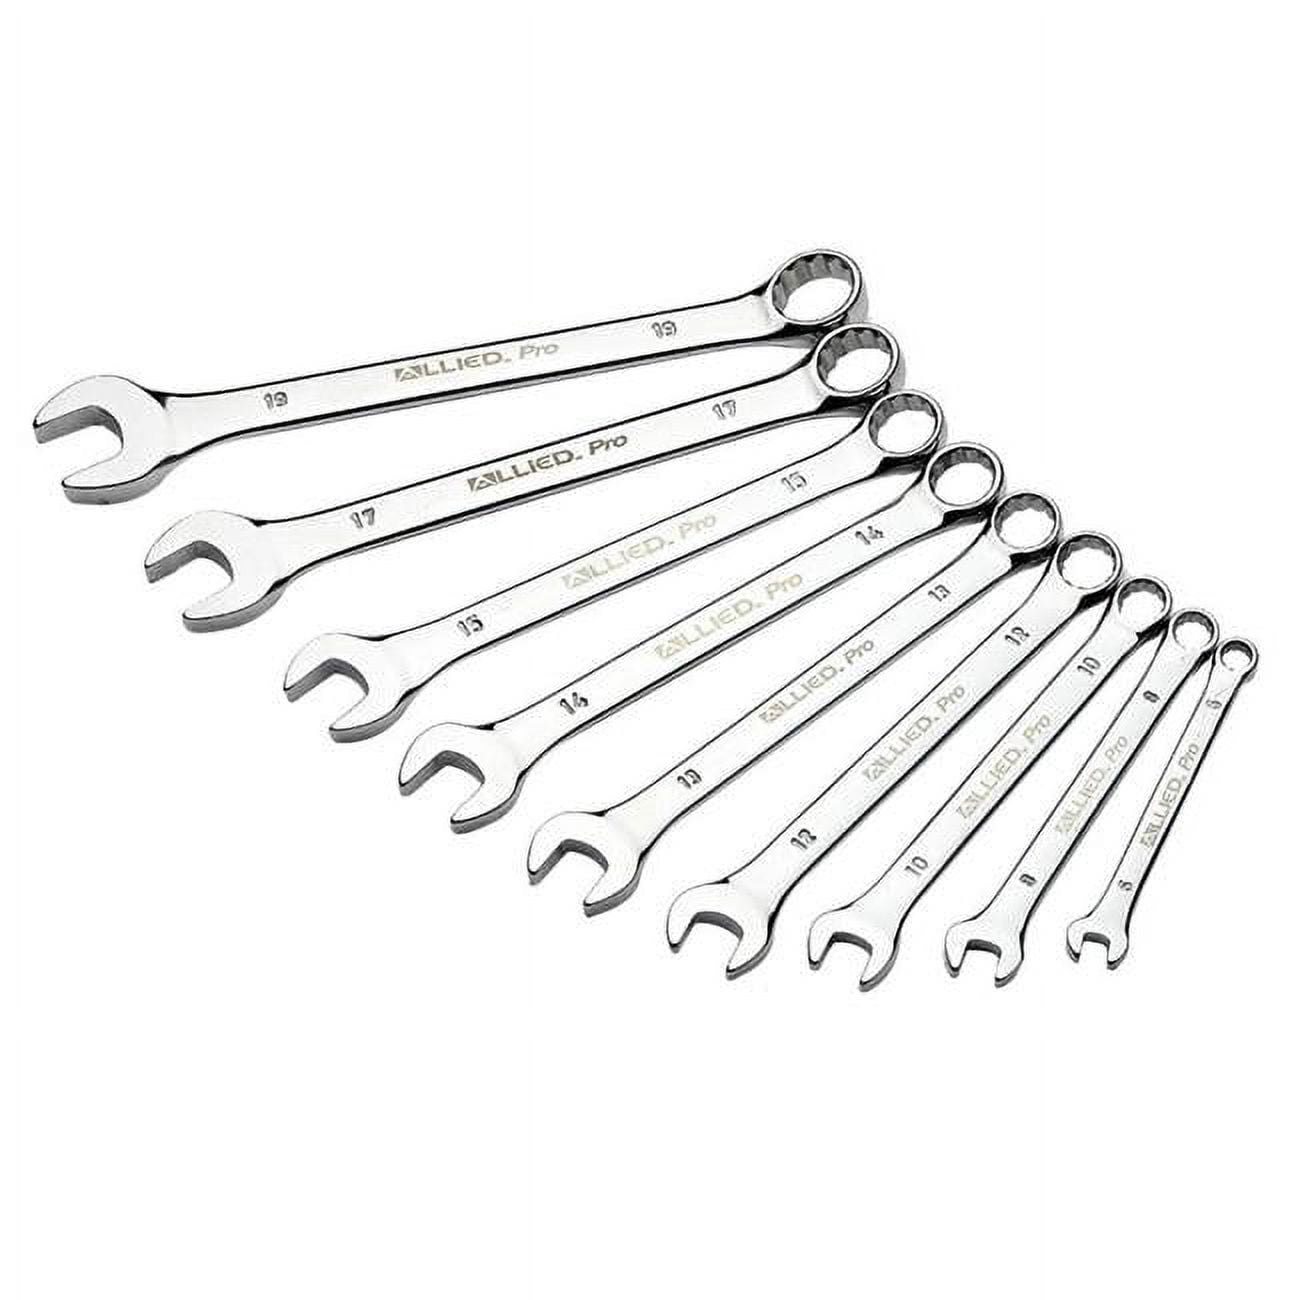 Picture of Allied 20303 Metric Full Polished Combination Wrench Set - 9 Piece